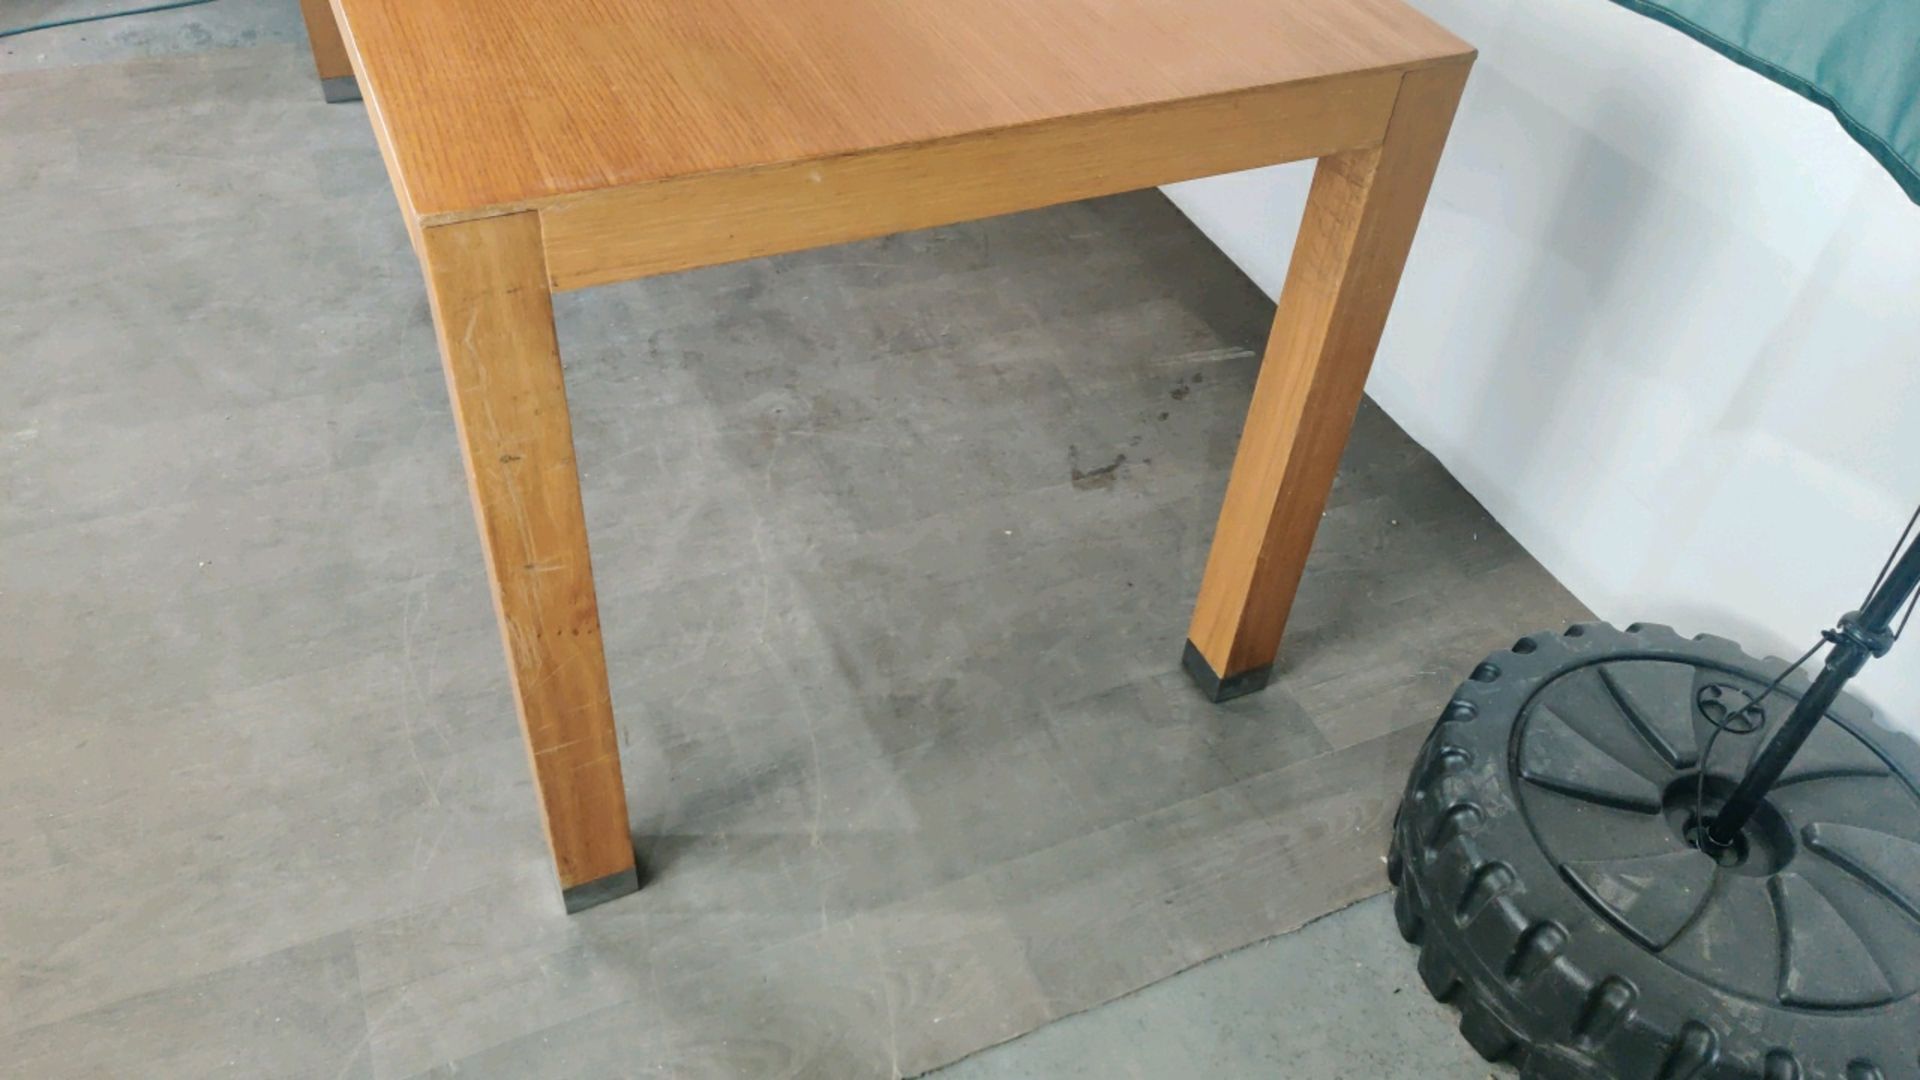 Large Wooden Table With Chromed Feet - Image 5 of 5